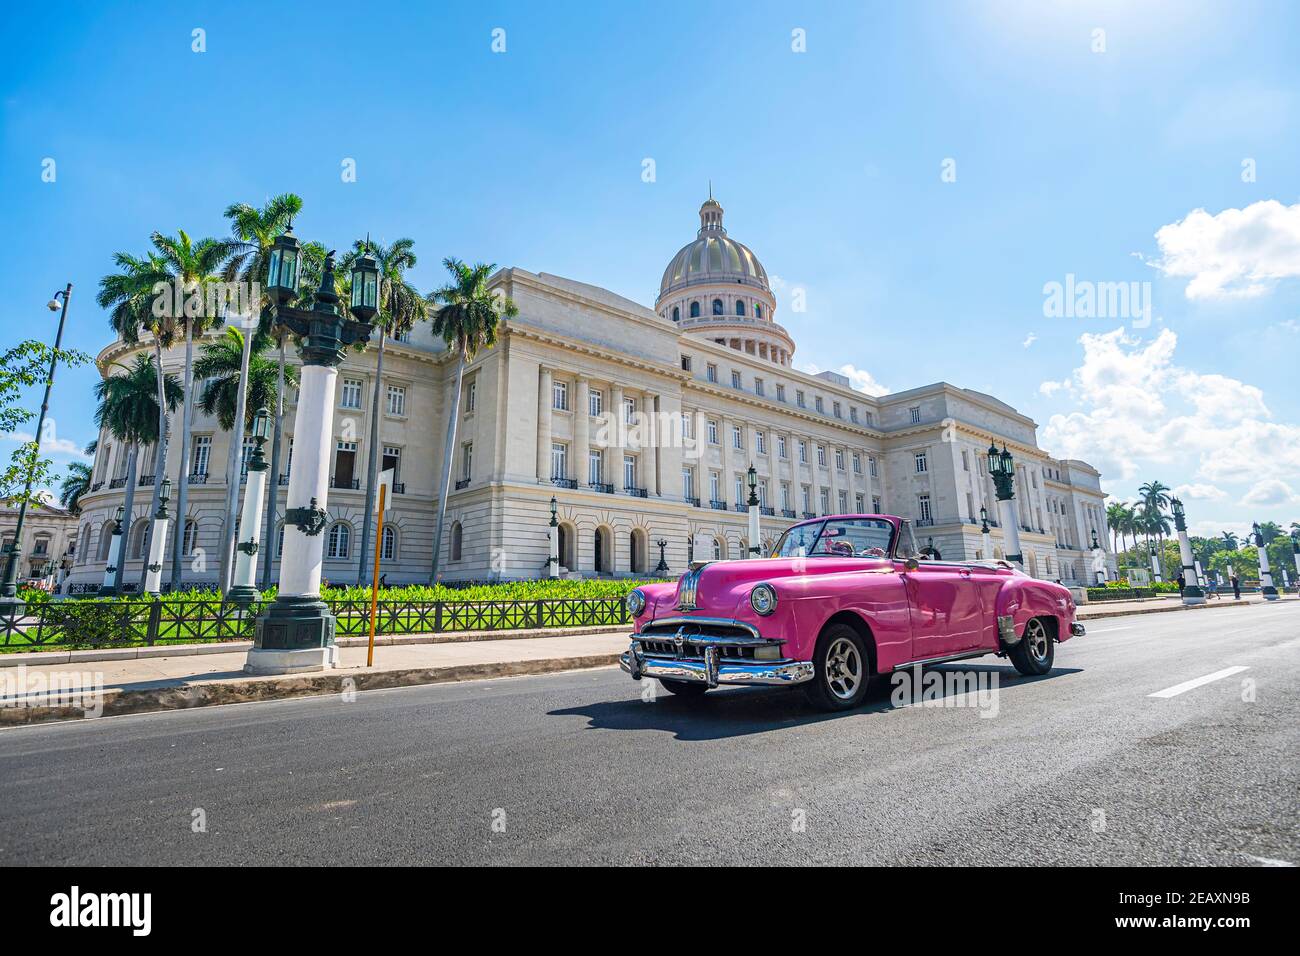 A vintage American retro carconvertible rides on an asphalt road in front of the Capitol in old town Havana. Tourist taxi cabriolet. Stock Photo